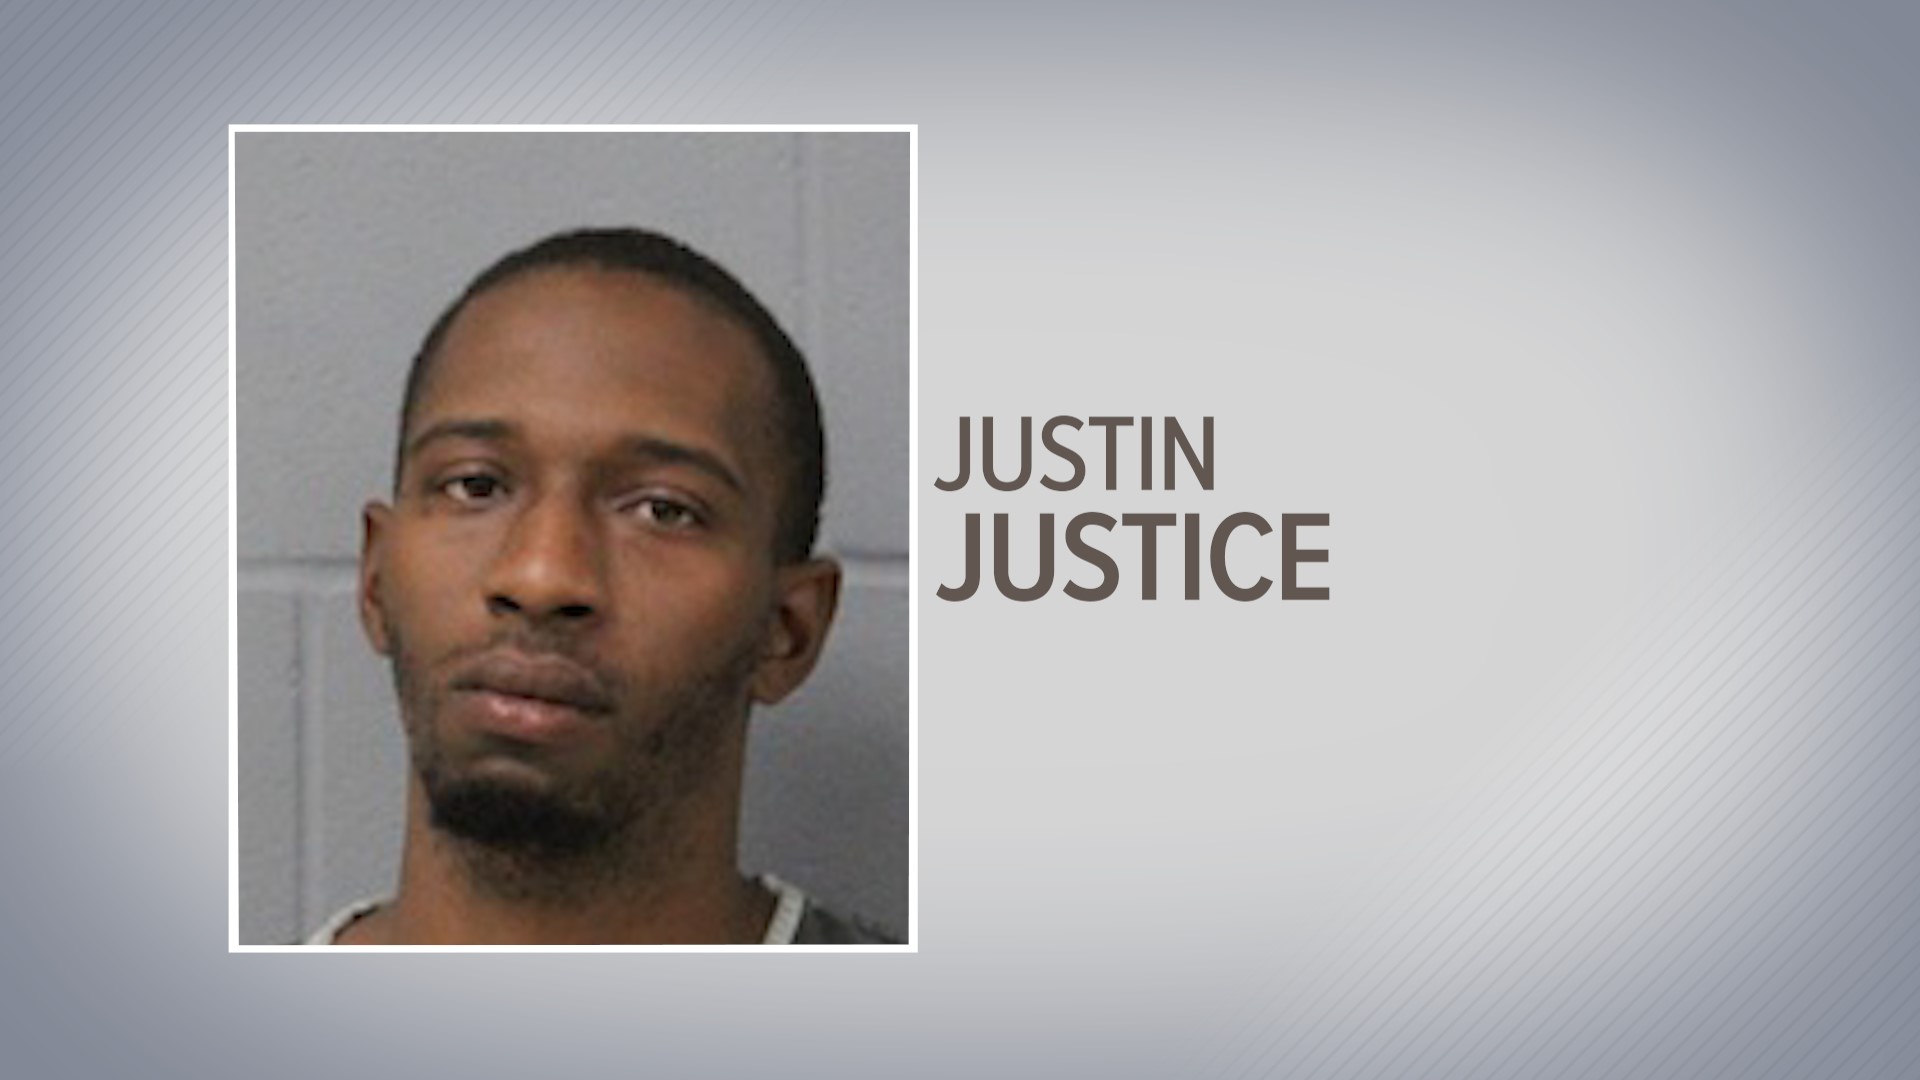 Justin Barend Justice, 28, is accused of shooting and killing Teressa Ferguson in a road rage incident that happened in north Austin on Sept. 30.